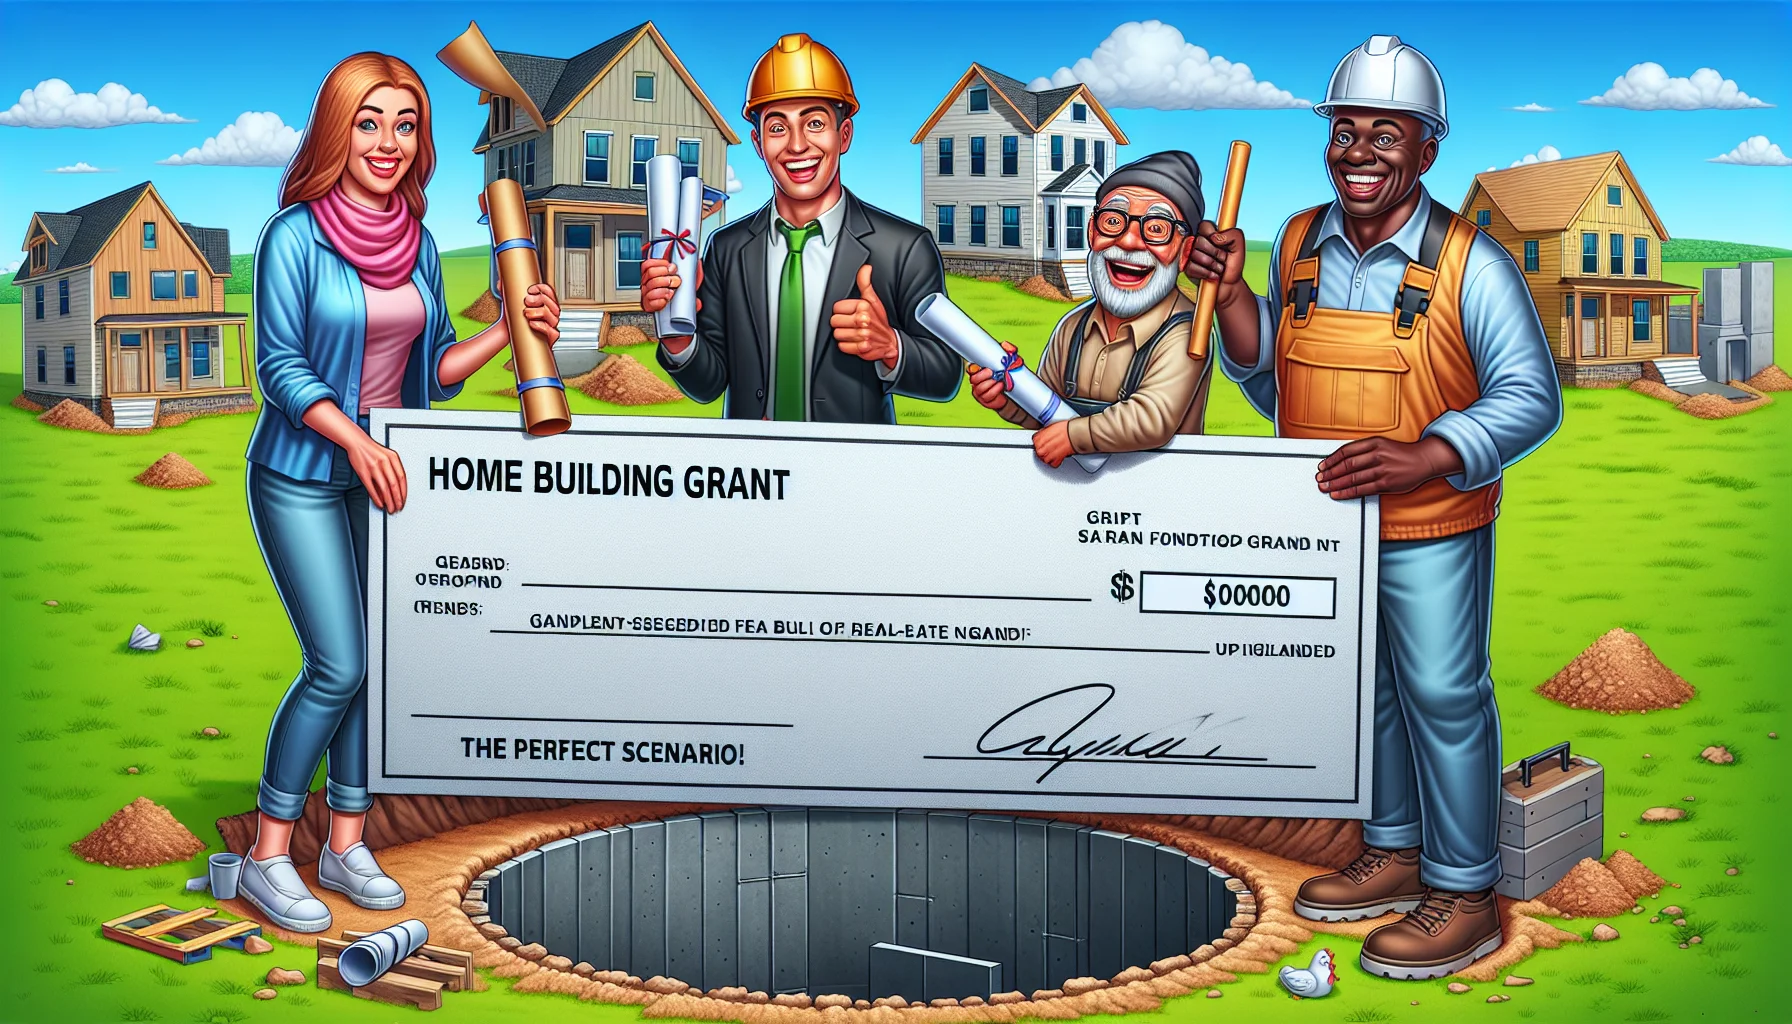 Depict a humorous realistic scenario showing the perfect home building situation related to real-estate grants. The scene should include an overjoyed group of people from different descents; a Caucasian adult woman holding a blueprint, a middle-aged Middle-Eastern man wearing a hard hat, smiling and standing near an oversized foundation hole, and a Black elderly man holding an oversized check labeled 'Home building Grant'. There should also be a 'The Perfect Scenario' sign hanging above their heads. In the background, show an idyllic green landscape with nicely designed upcoming houses.